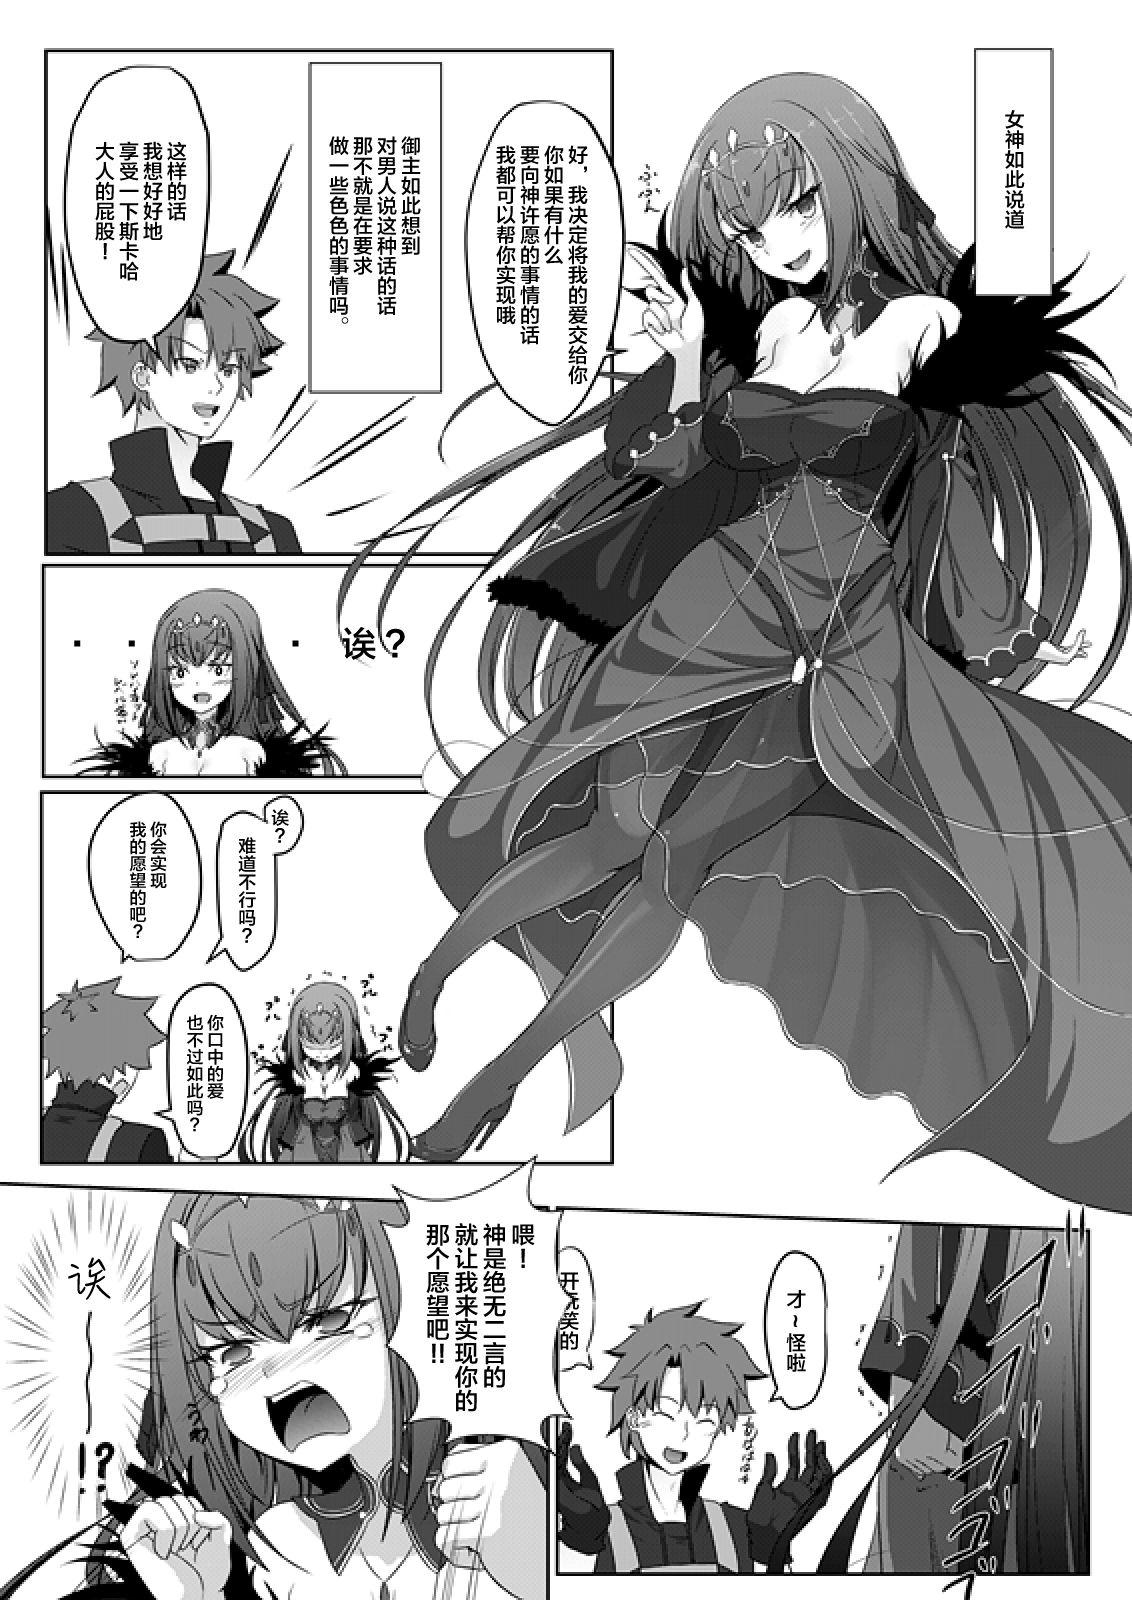 Stretching Onegai Scathach-sama!! - Fate grand order Romance - Page 4